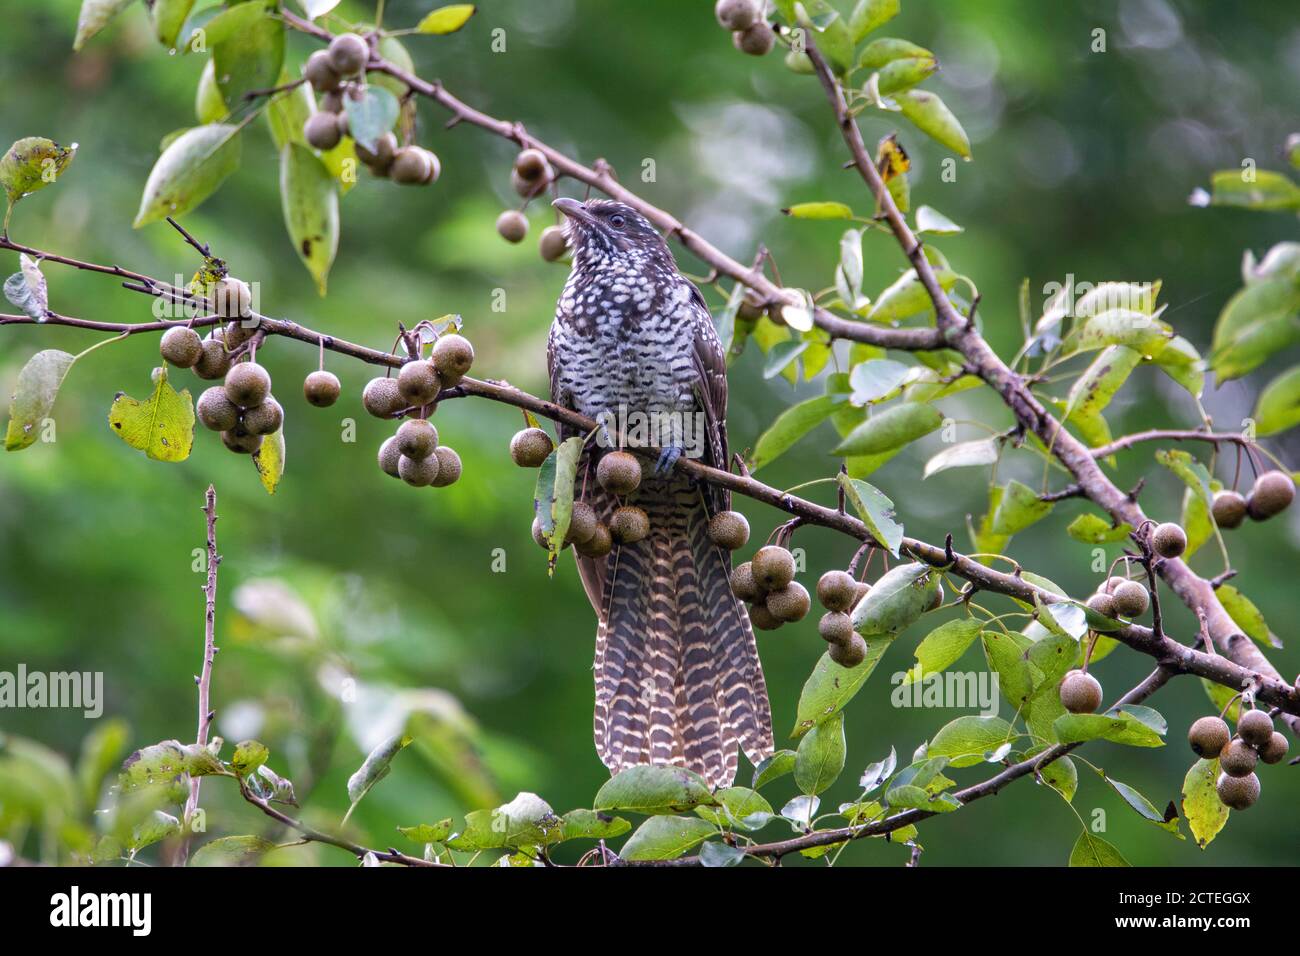 Bird - Asian Koel female on forest fruits tree branch Stock Photo